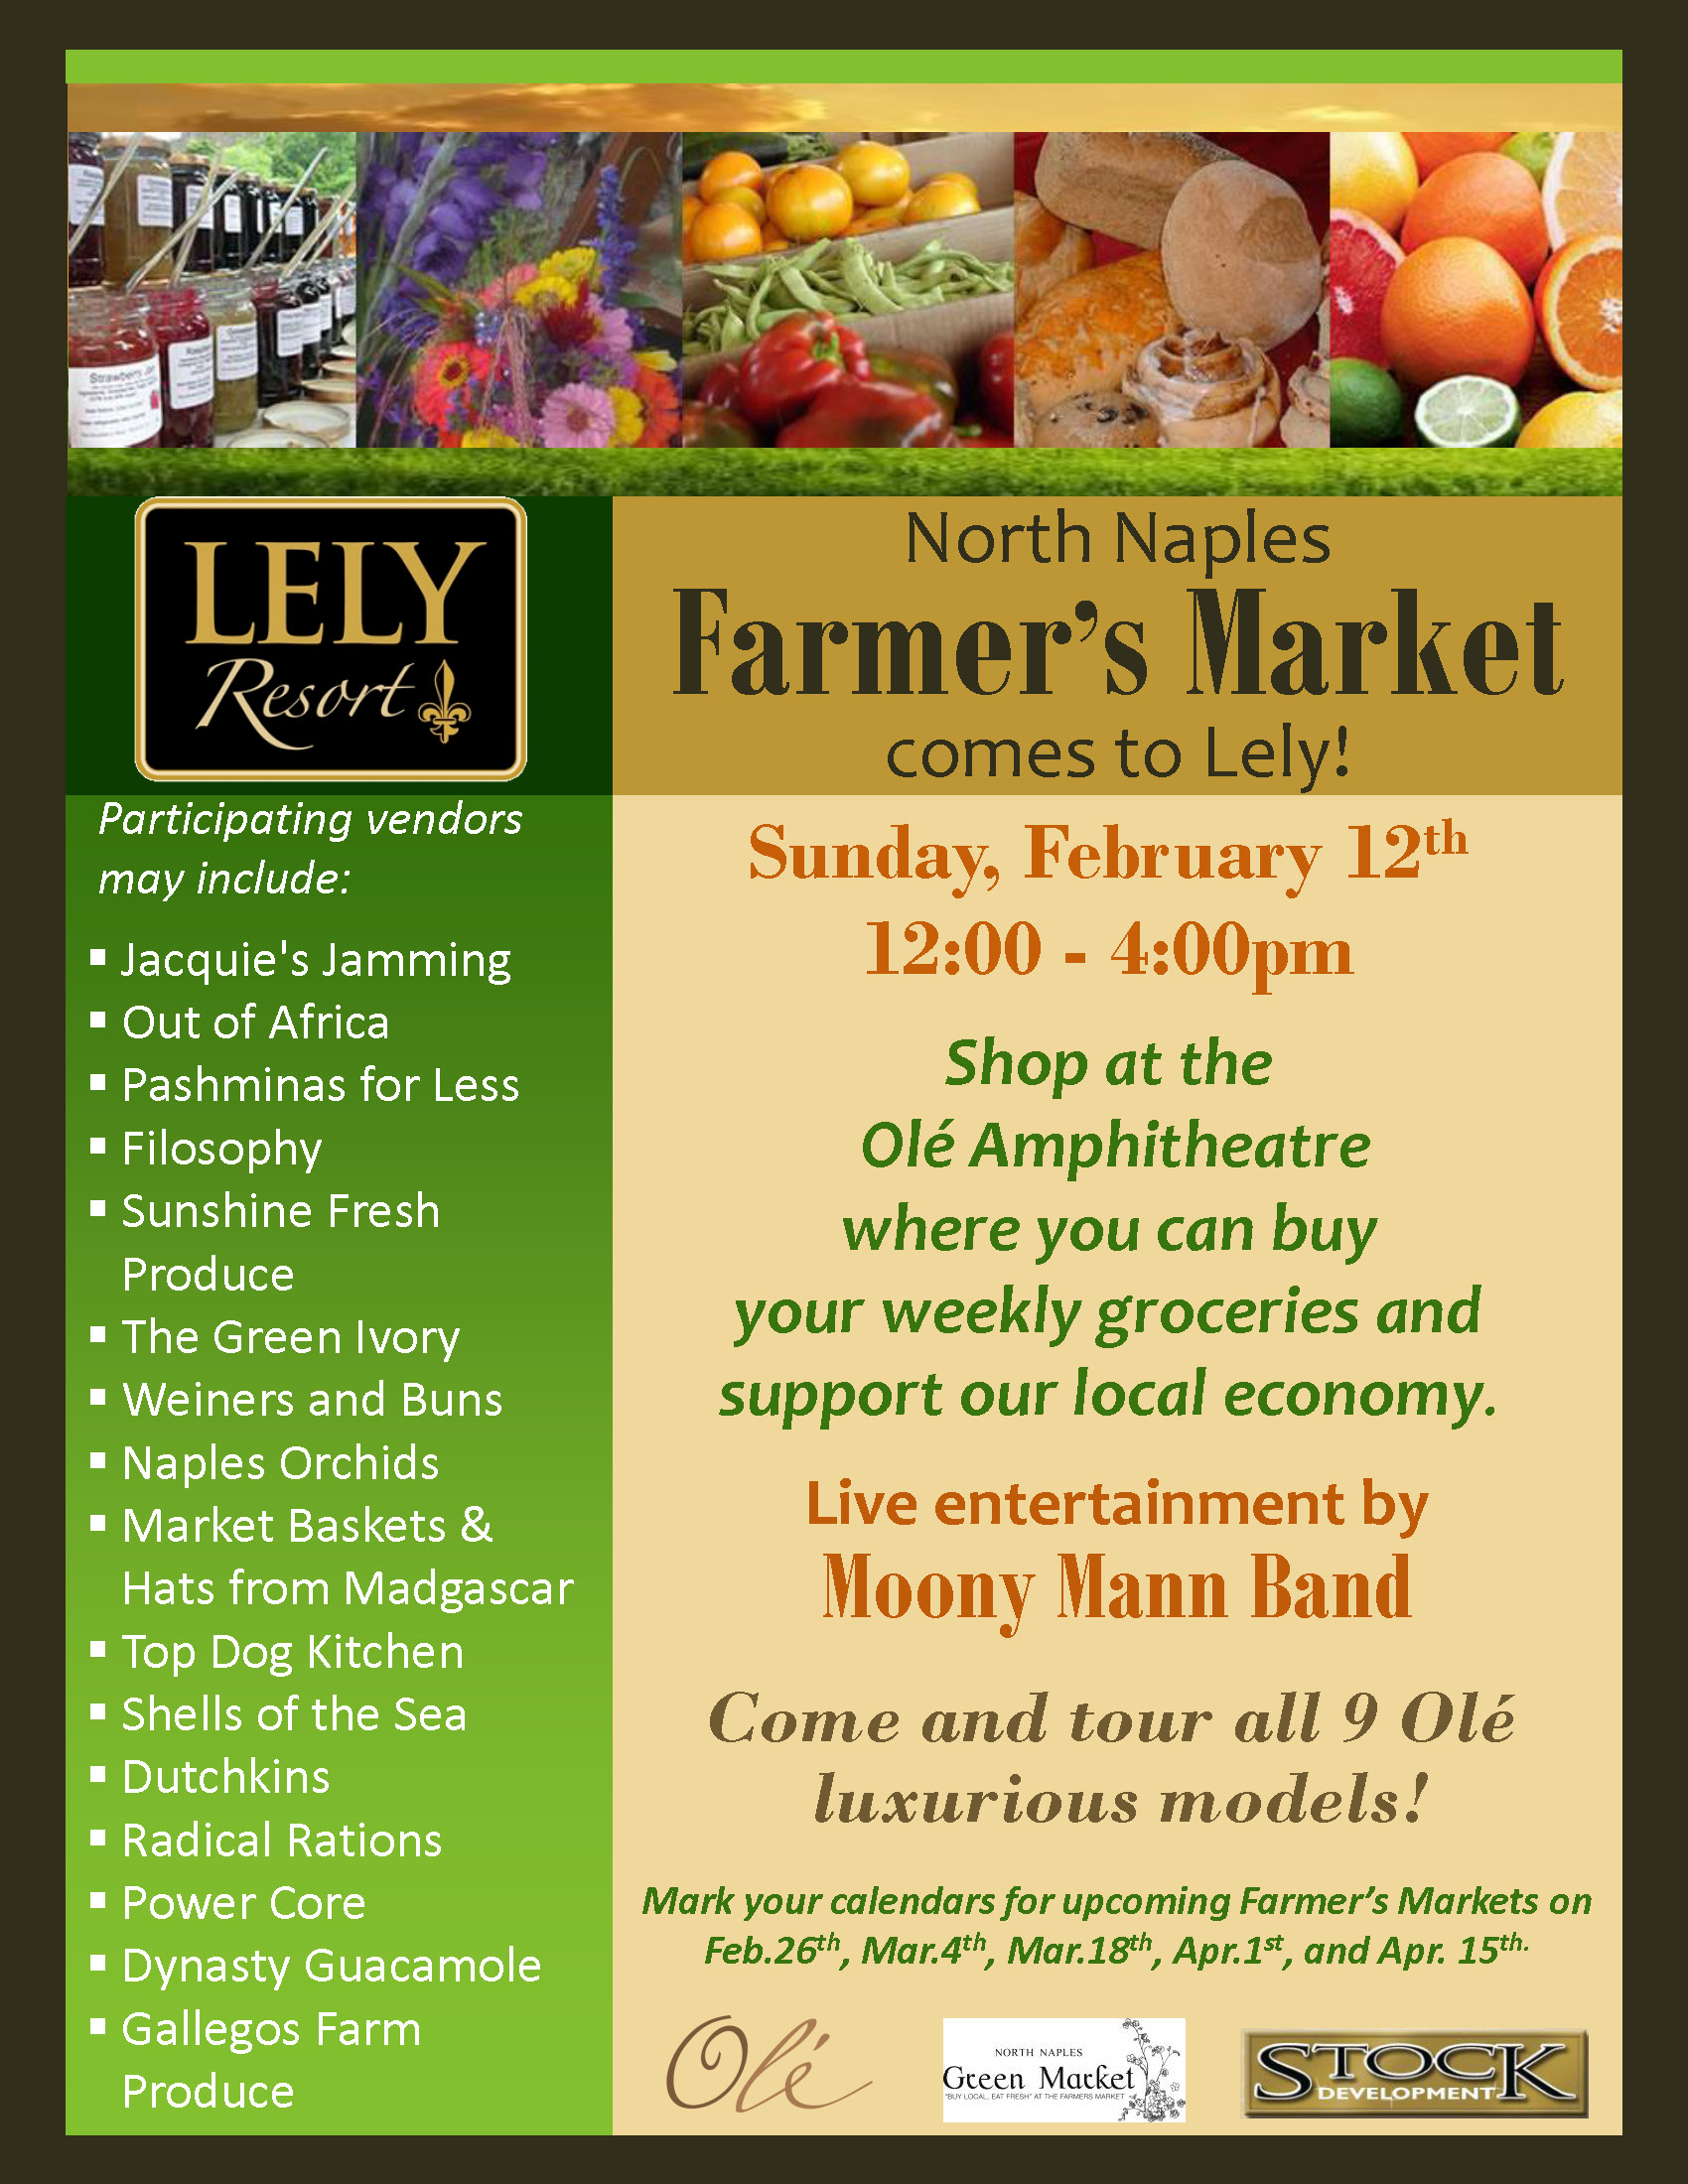 North Naples Farmer's Market Comes to Lely